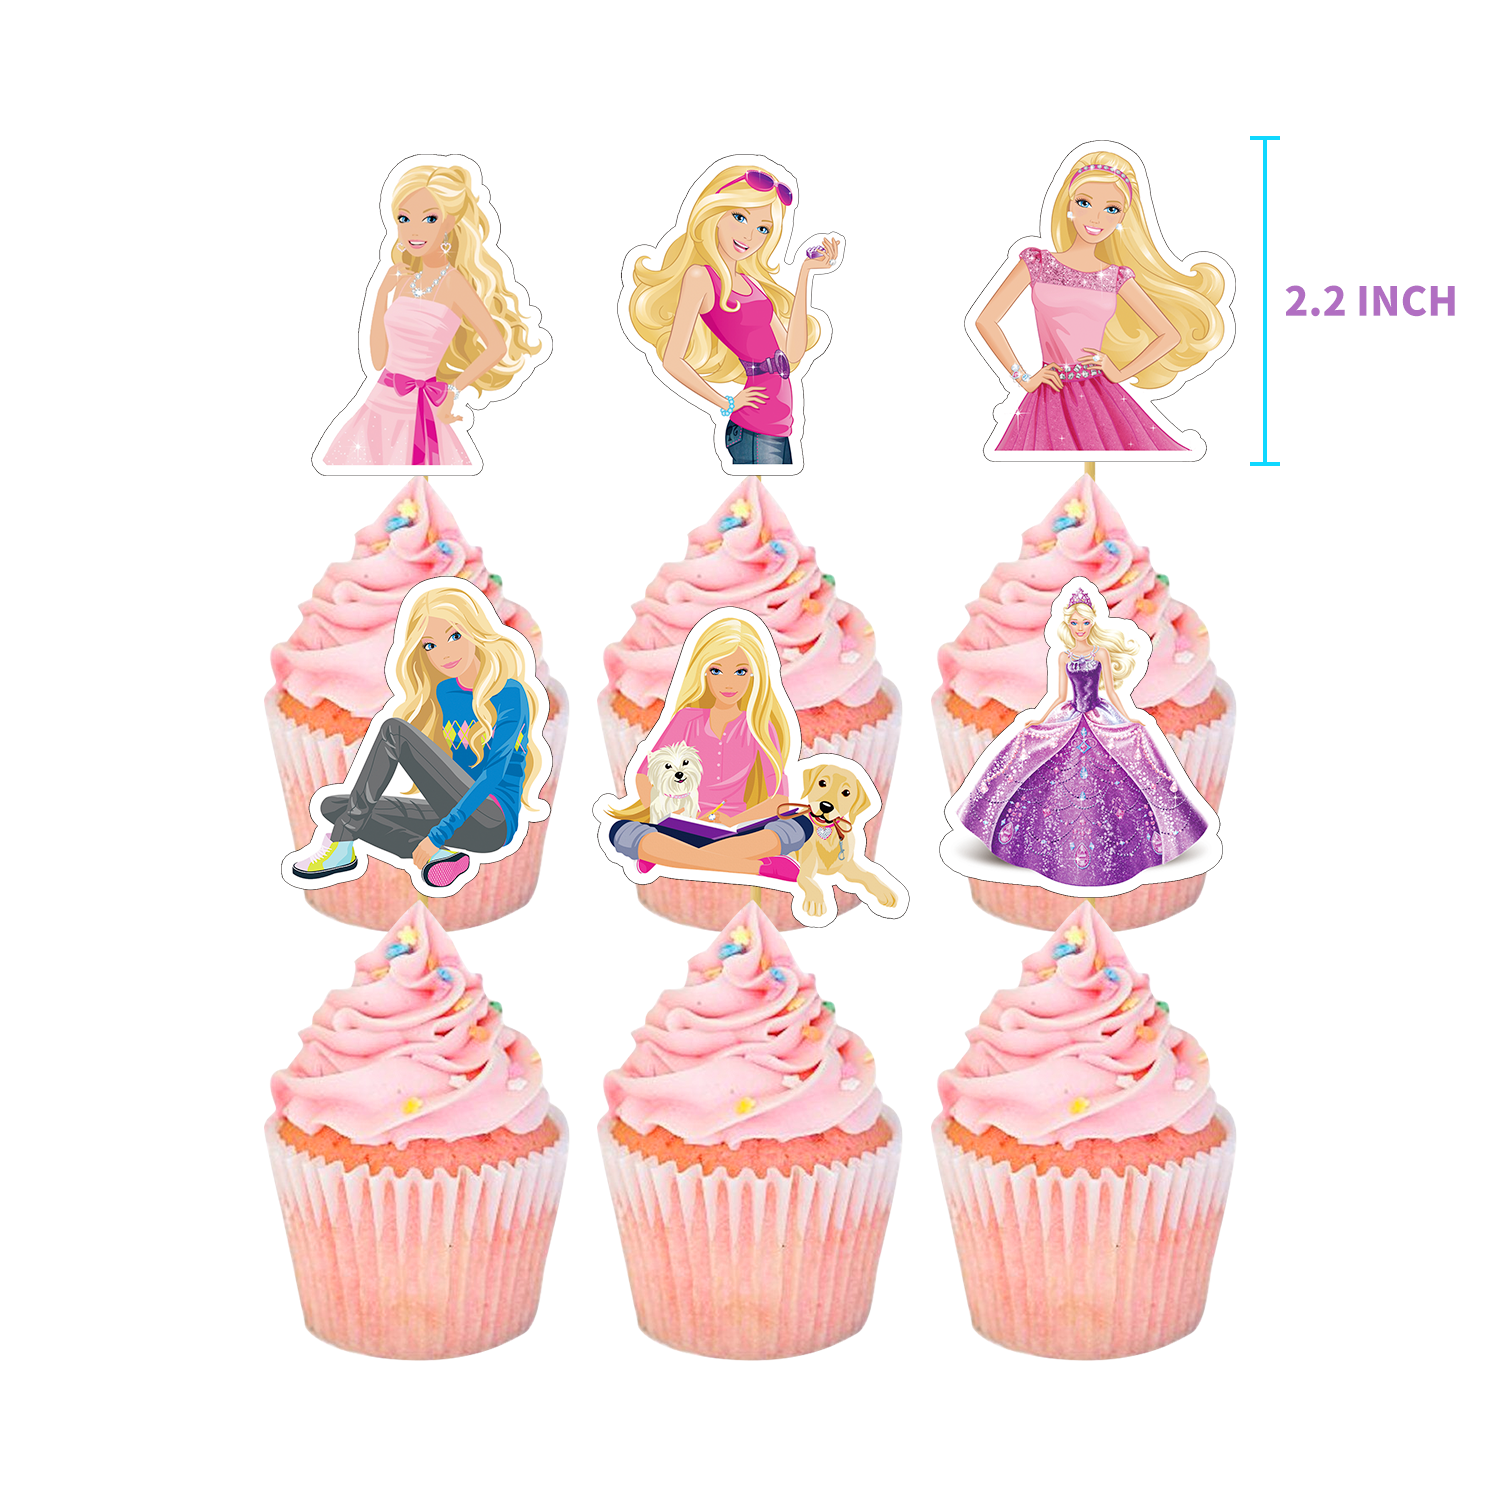 Barbi Party Kit Decorations Balloons Banner Caketopper Theme Girl Birthday Favors Includes